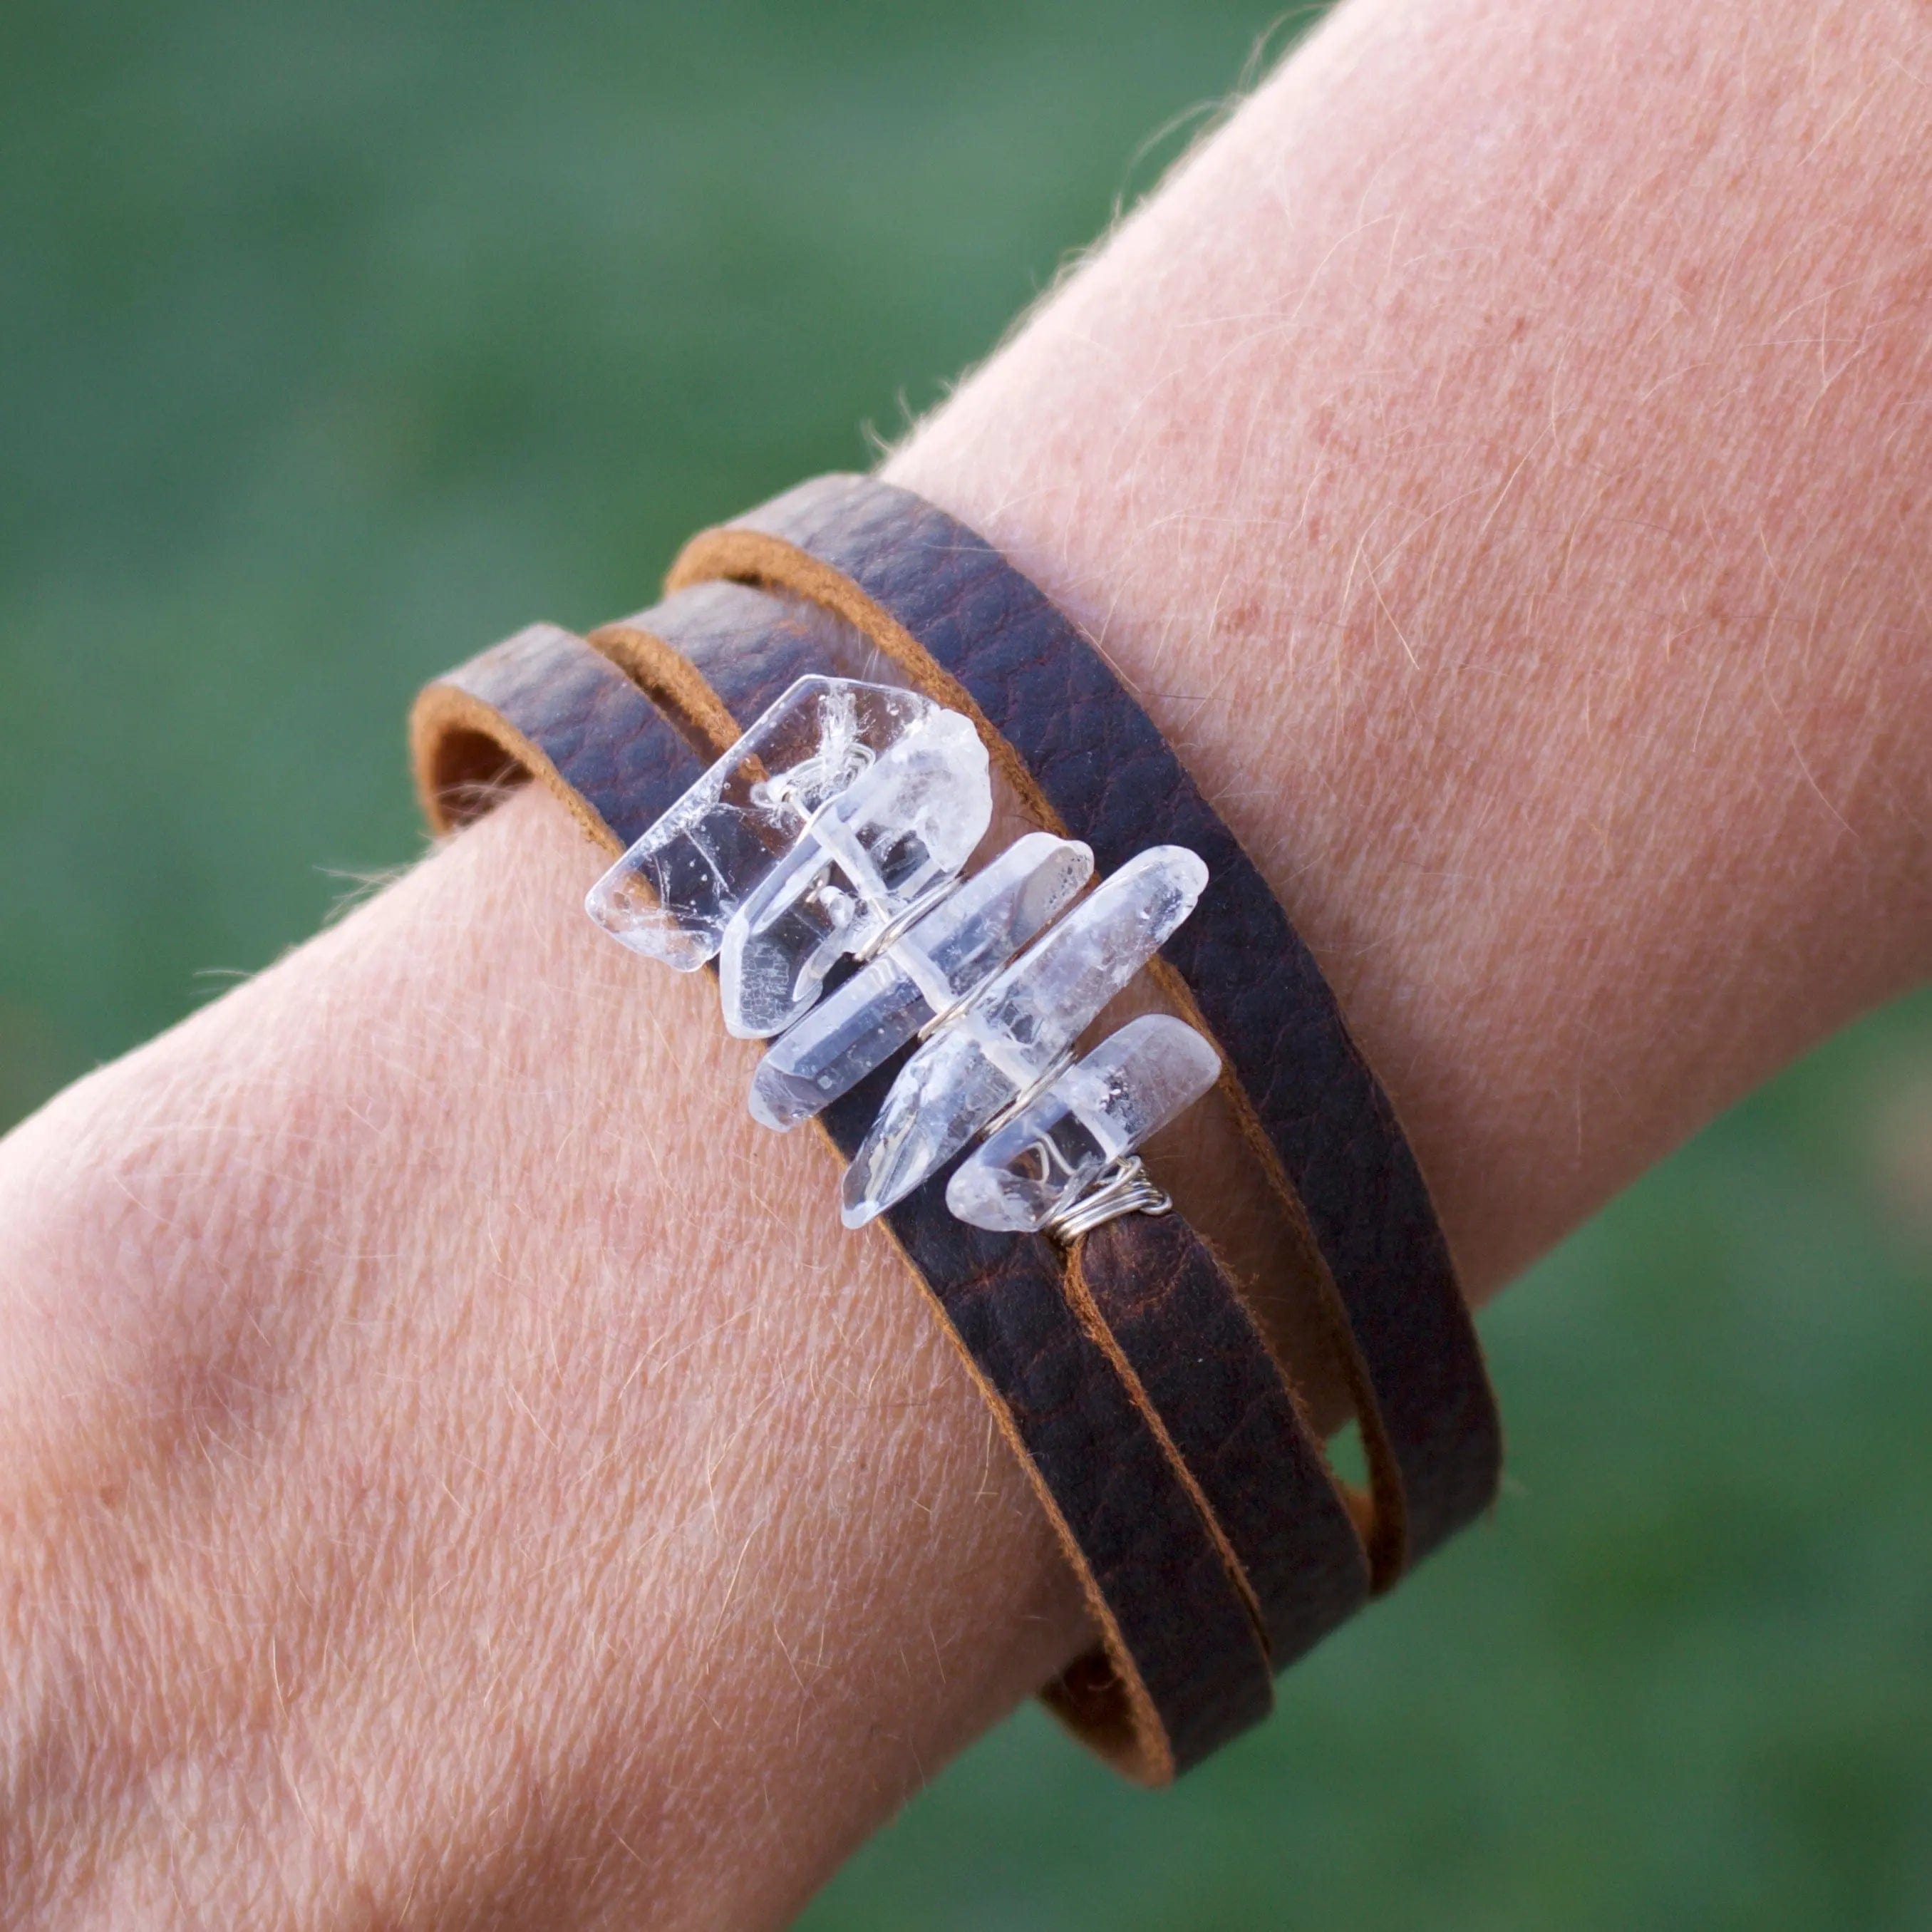 Leather bracelet DIY with free pattern - YouTube